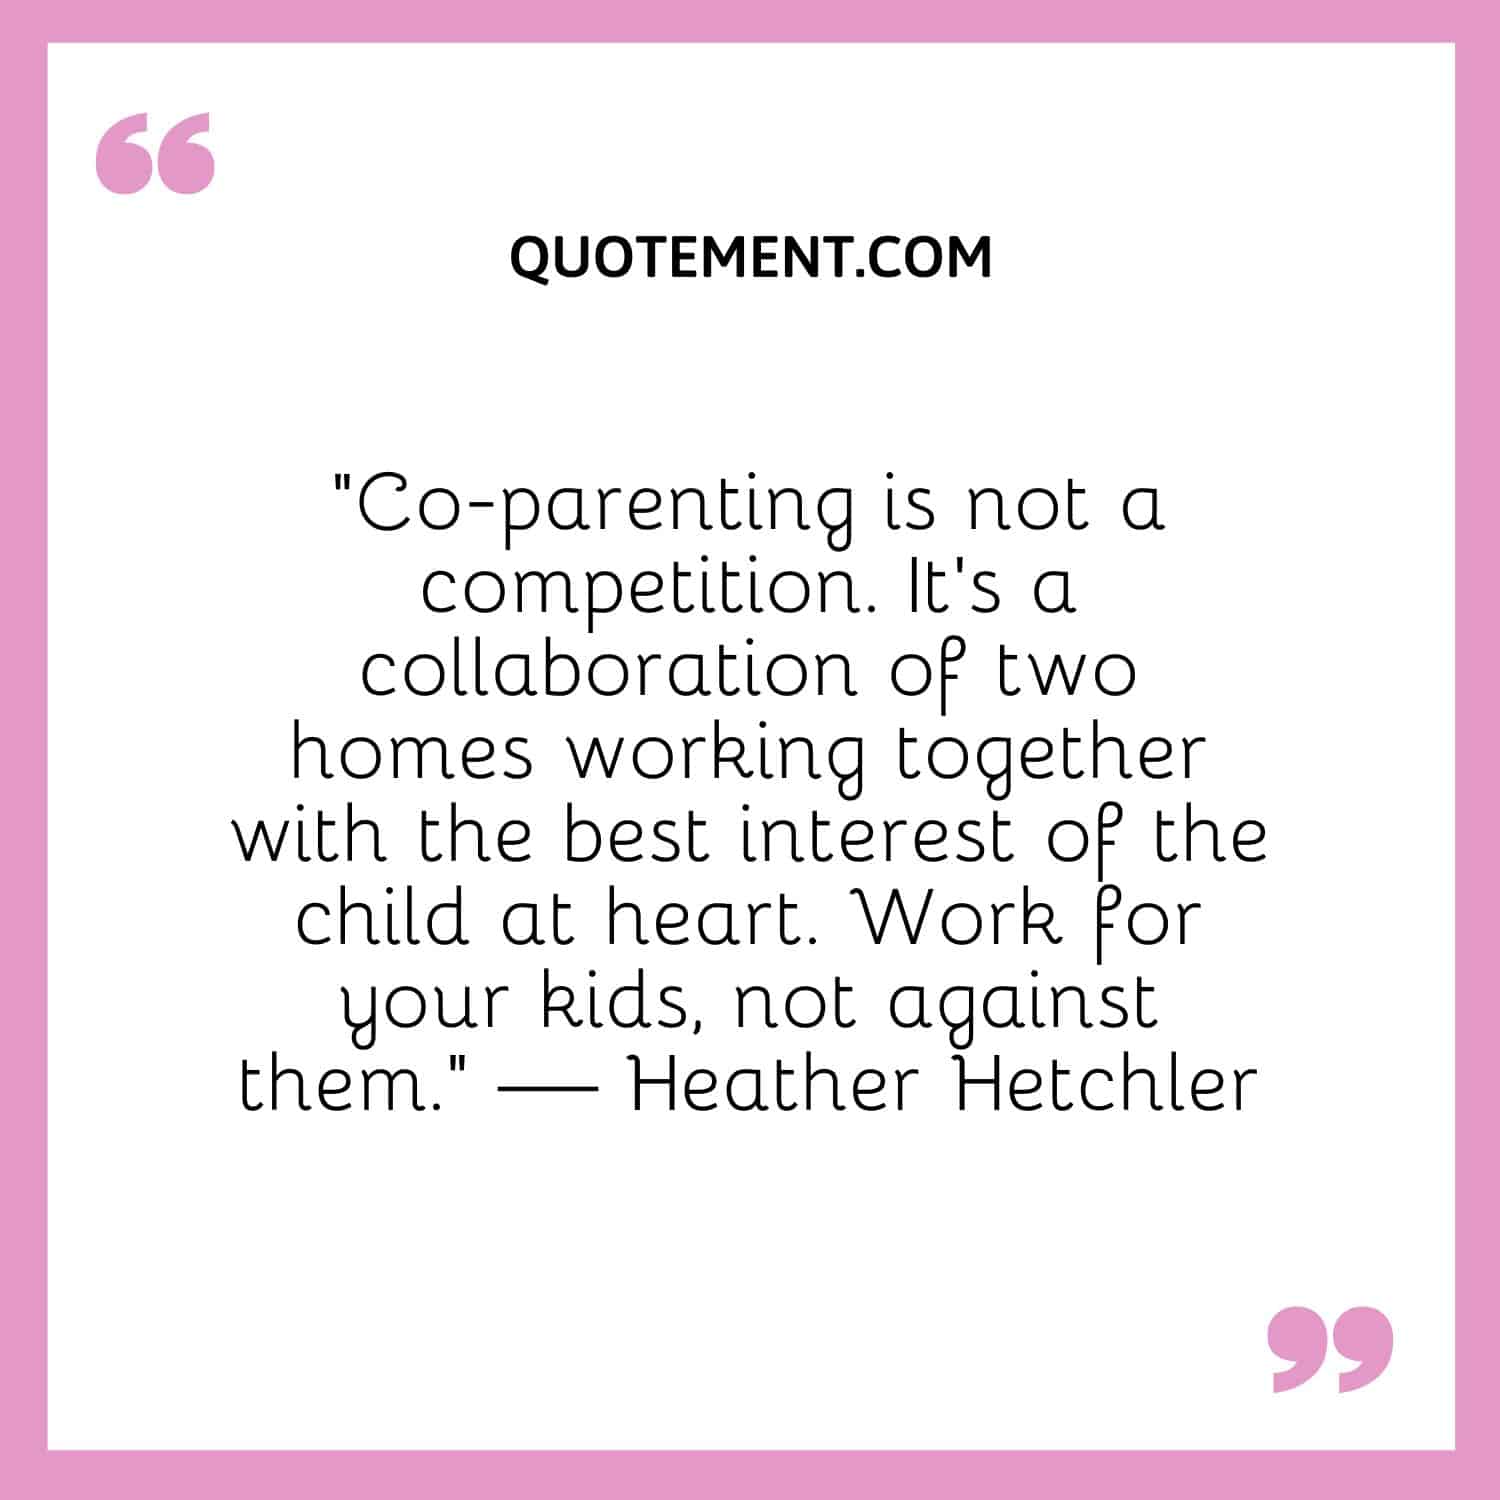 Co-parenting is not a competition